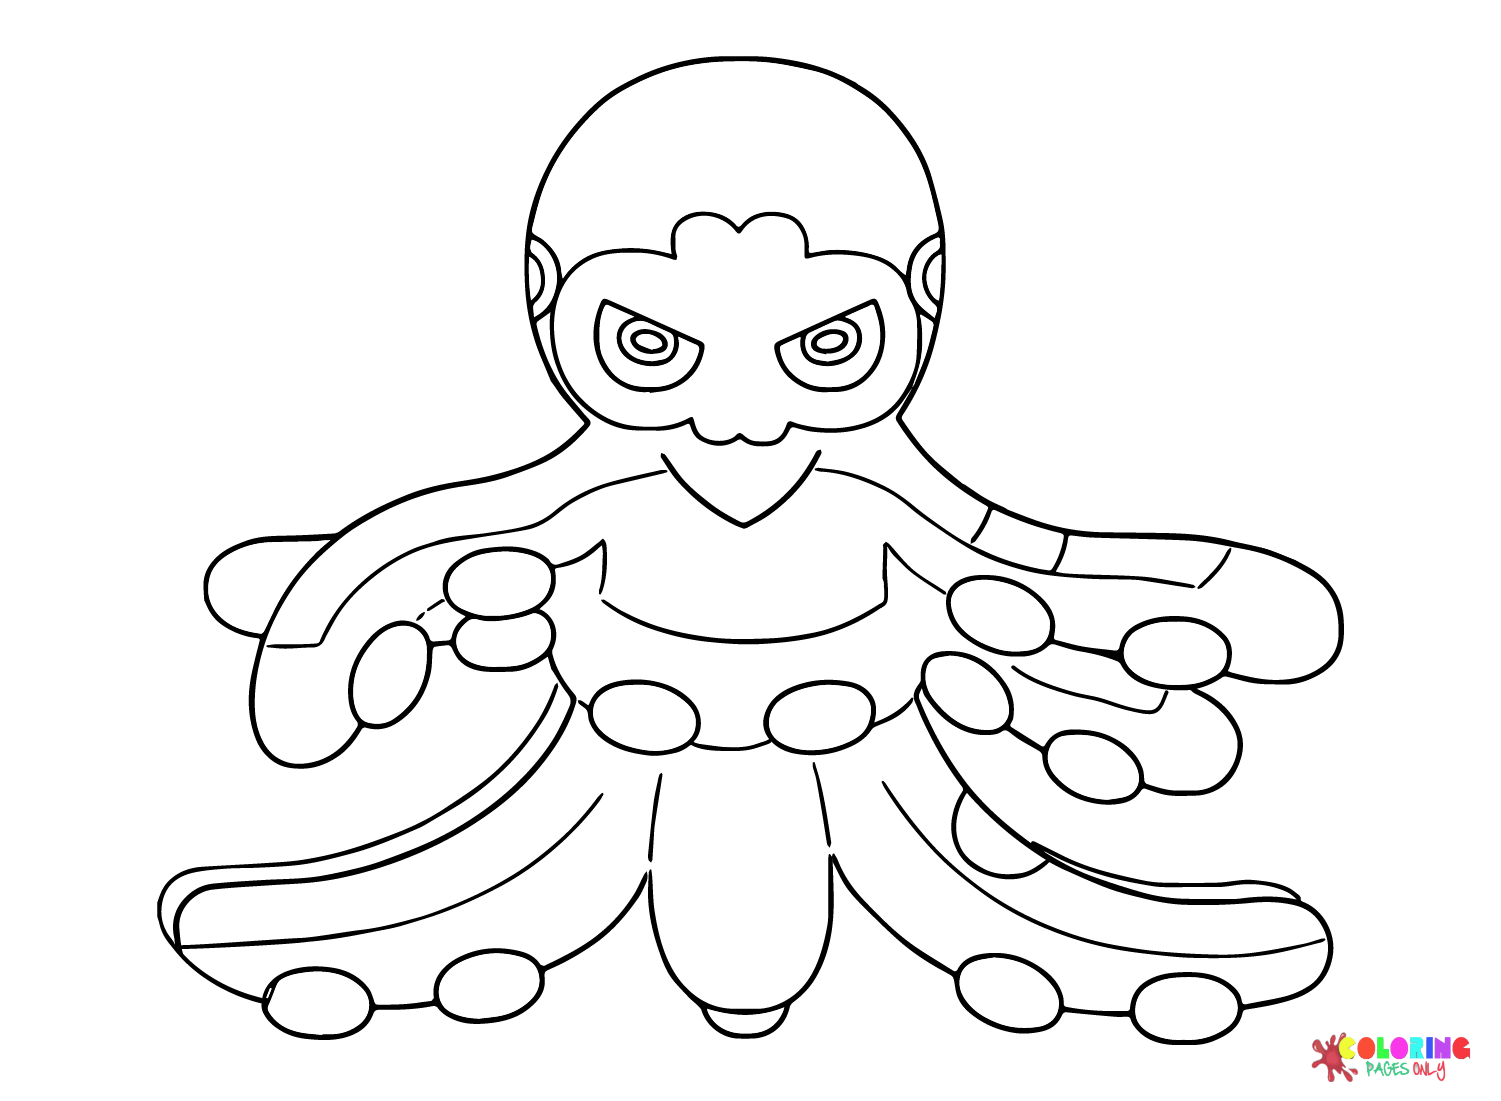 Printable Grapploct from Pokemon Coloring Page